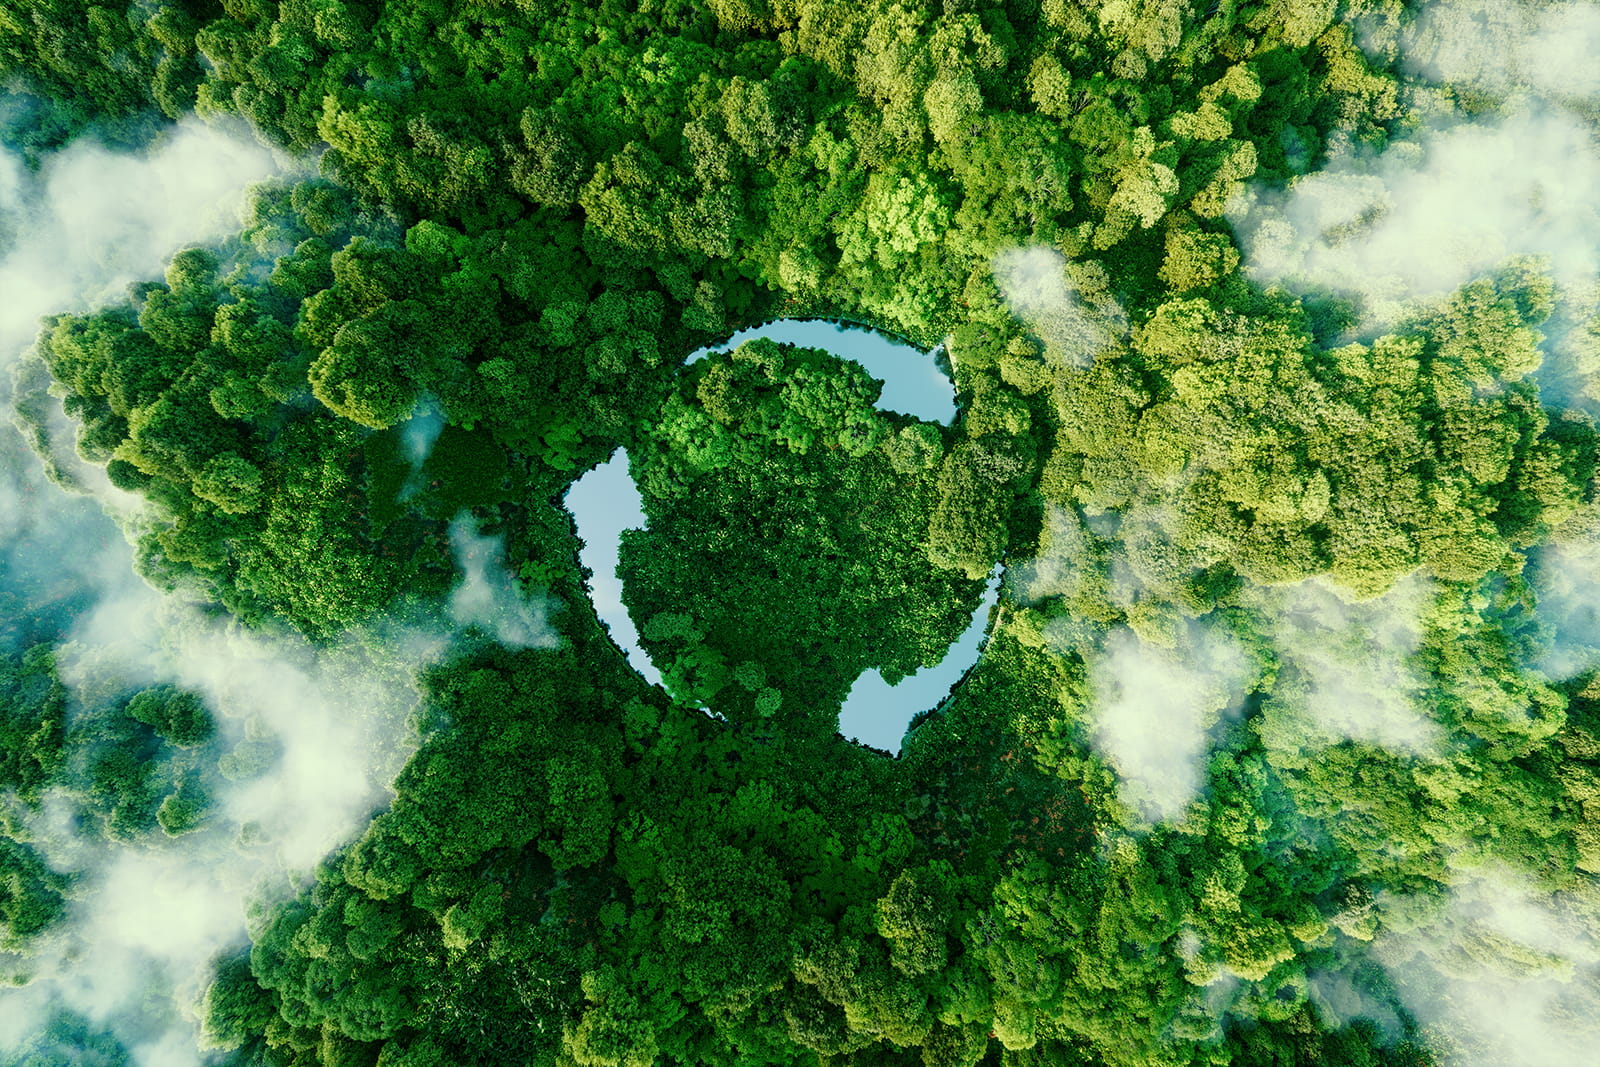 Image of green forest from above